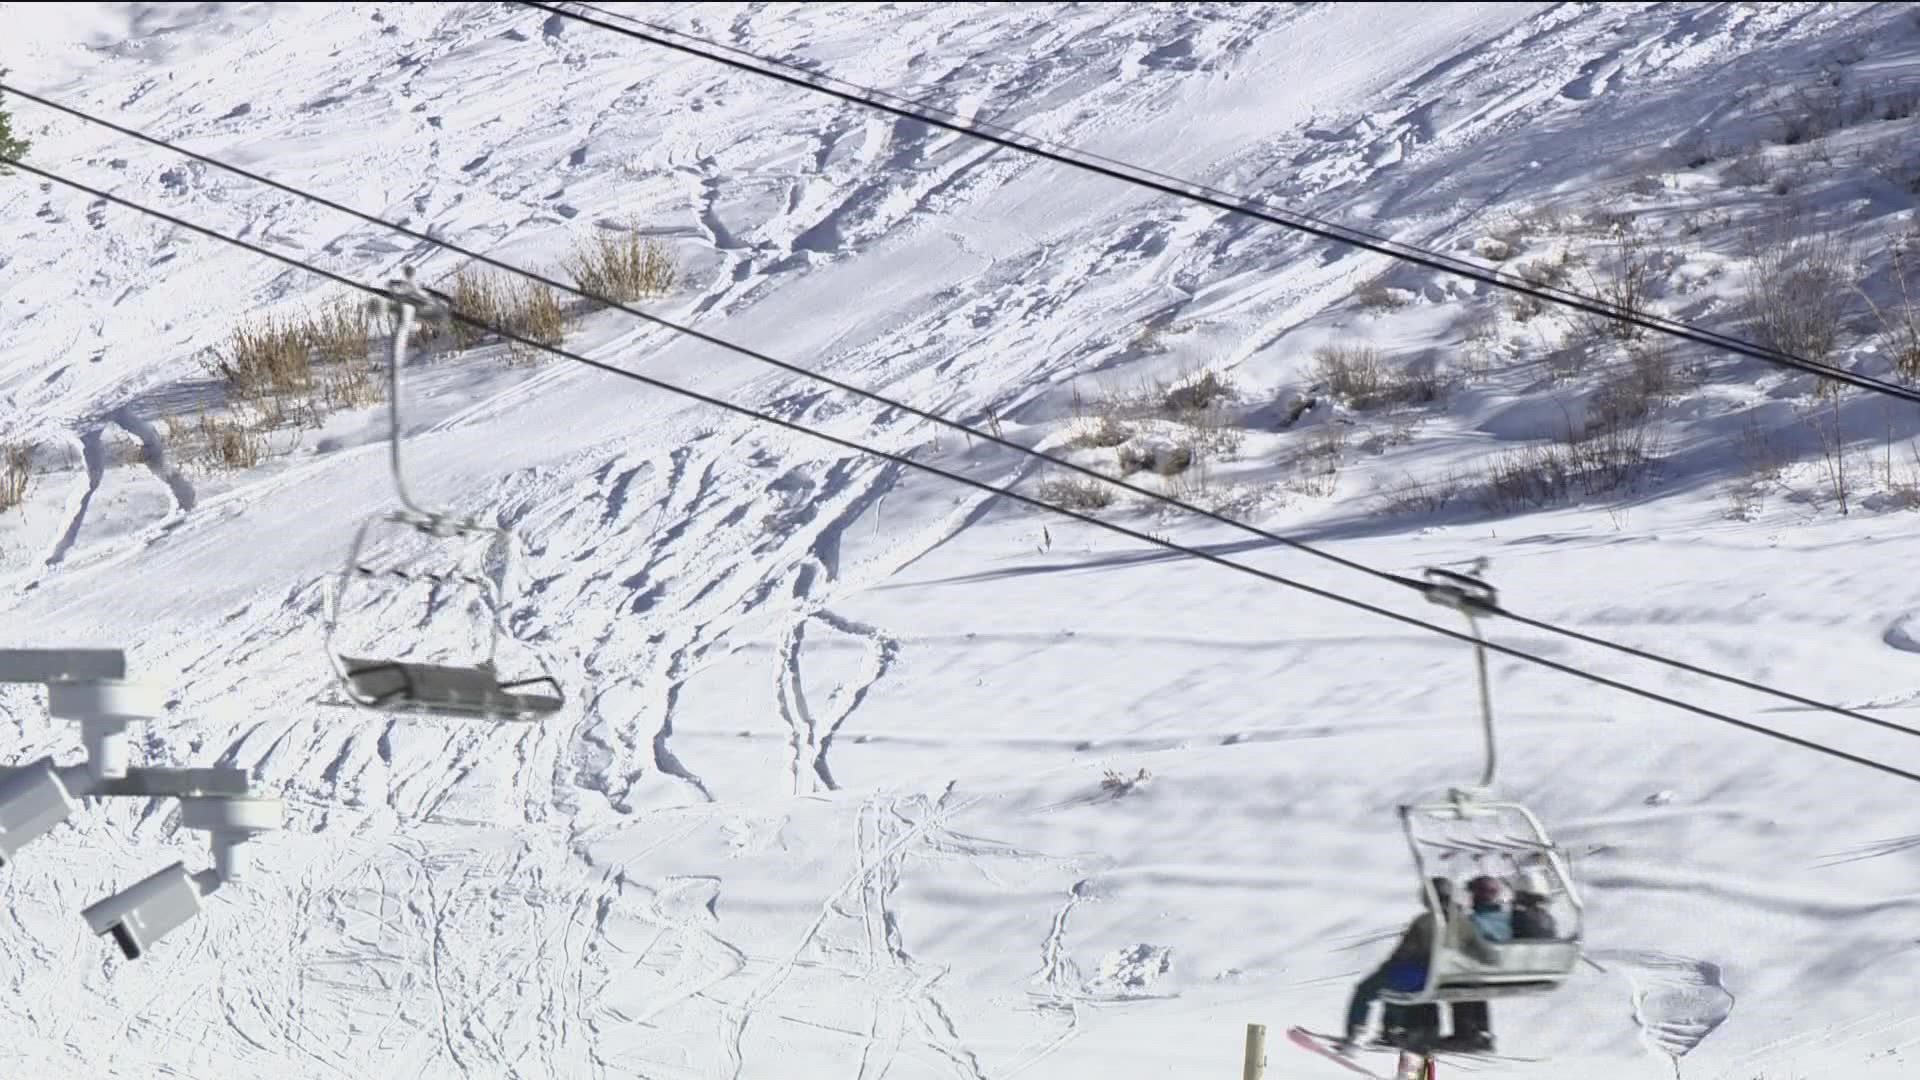 The earliest opening for Bogus Basin in 28 years.